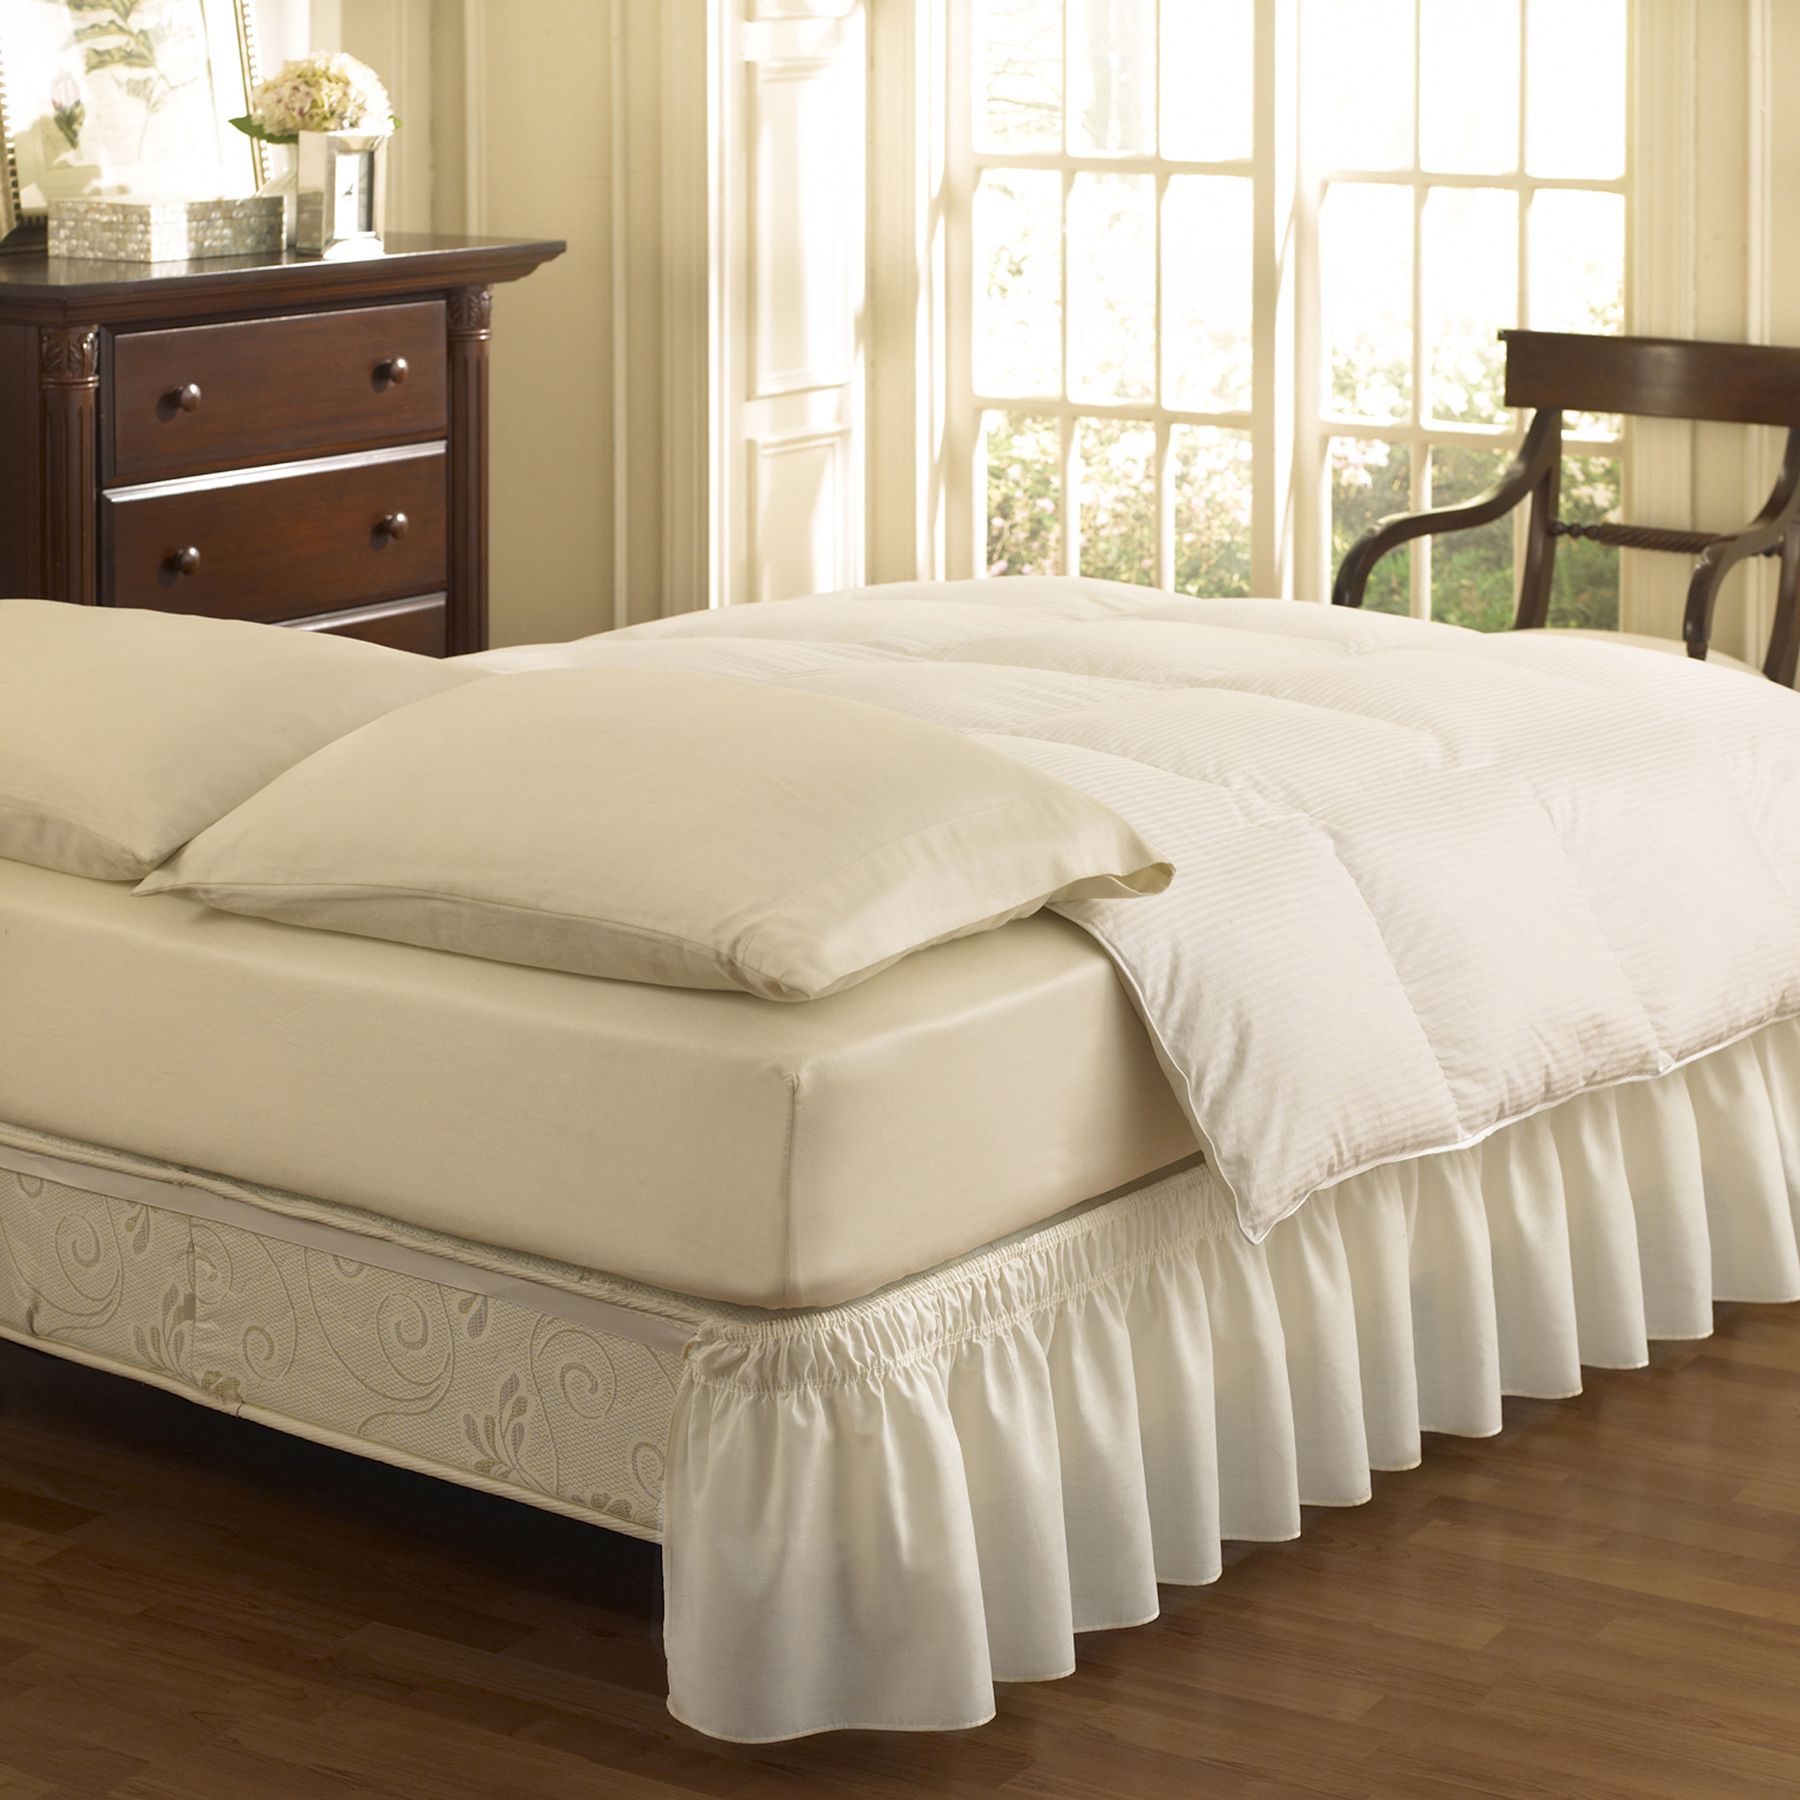 EasyFit &trade; Wrap Around Solid Ruffled Bed Skirt